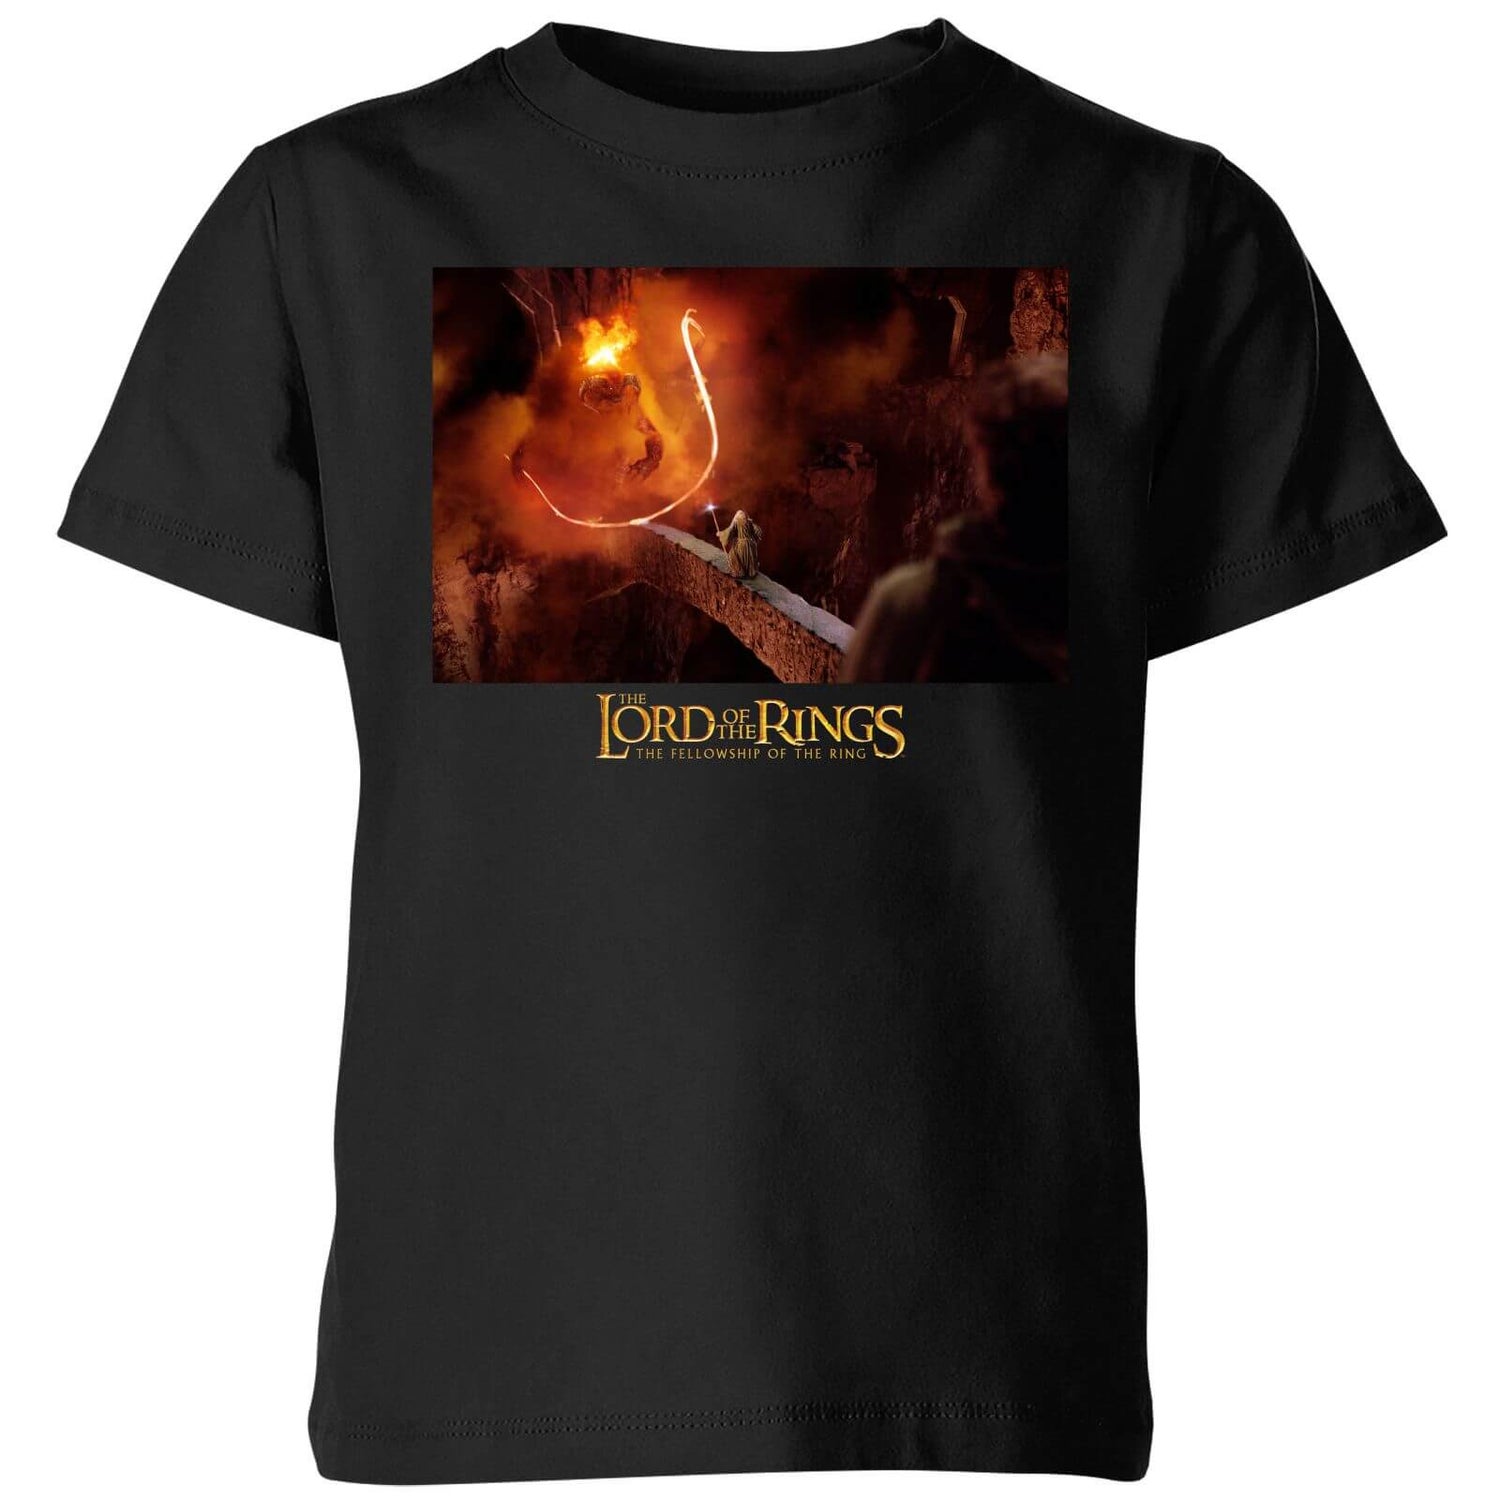 Lord Of The Rings You Shall Not Pass Kids' T-Shirt - Black